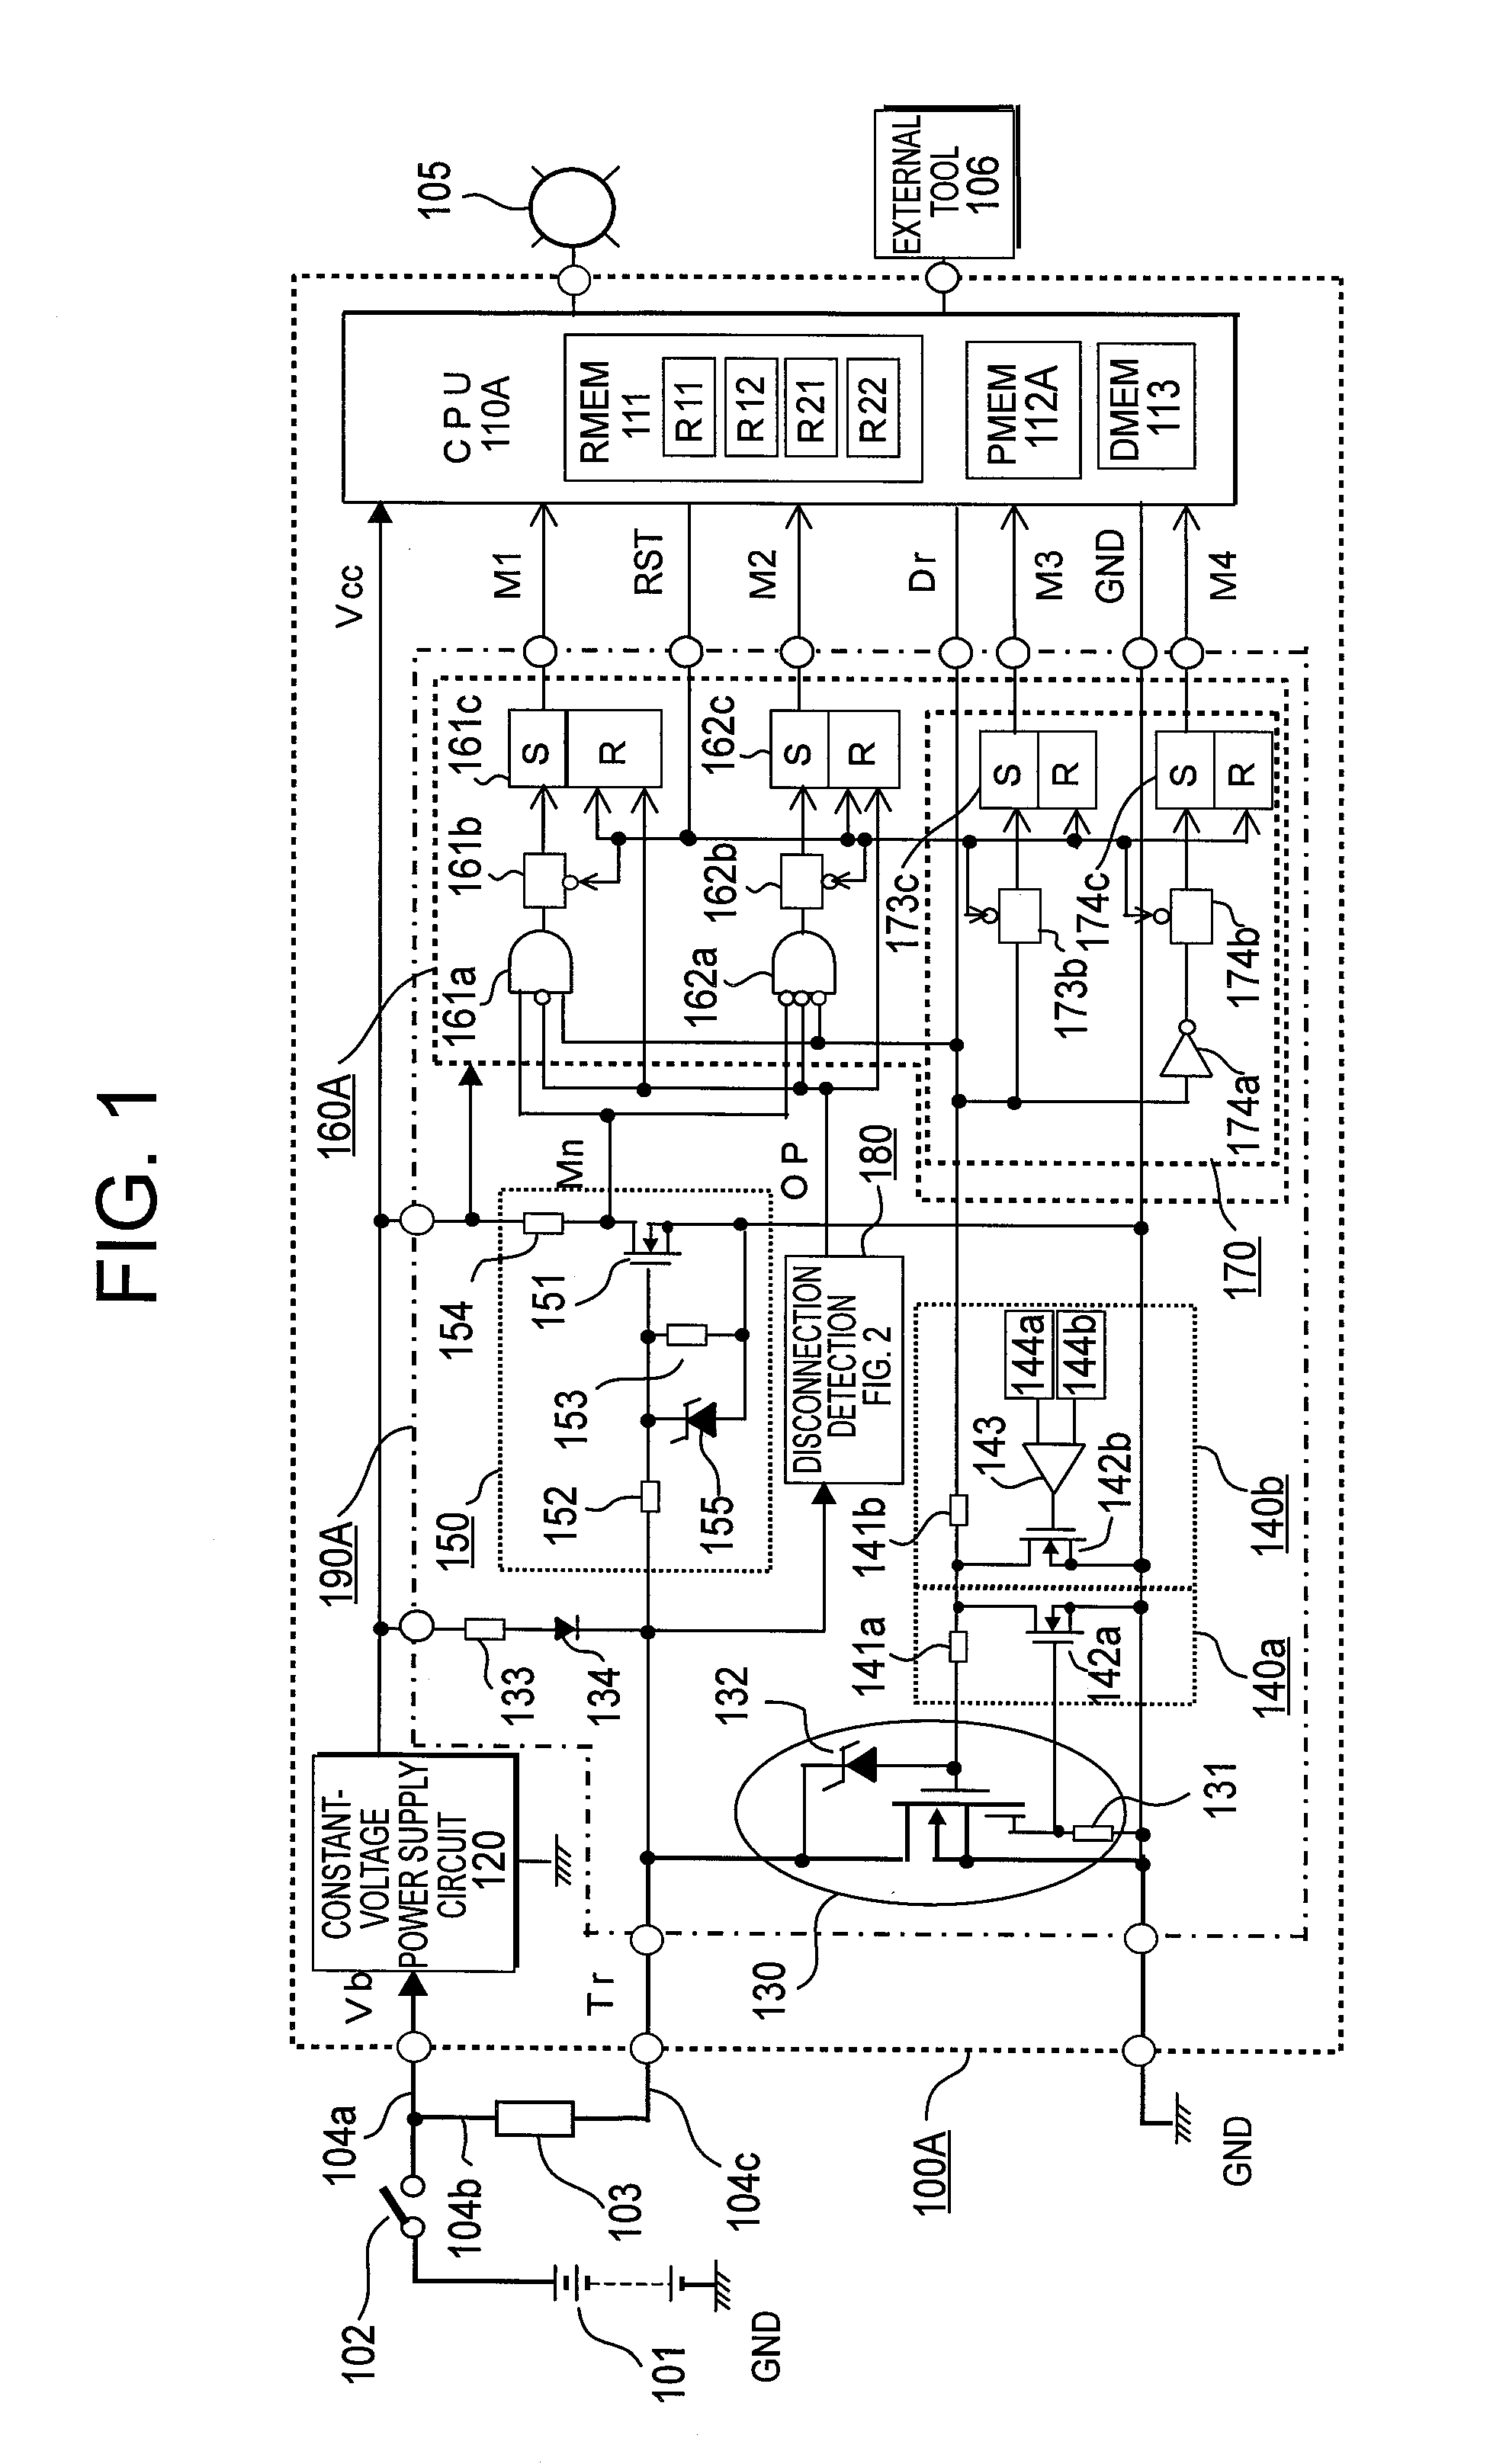 Drive control device for an electric load